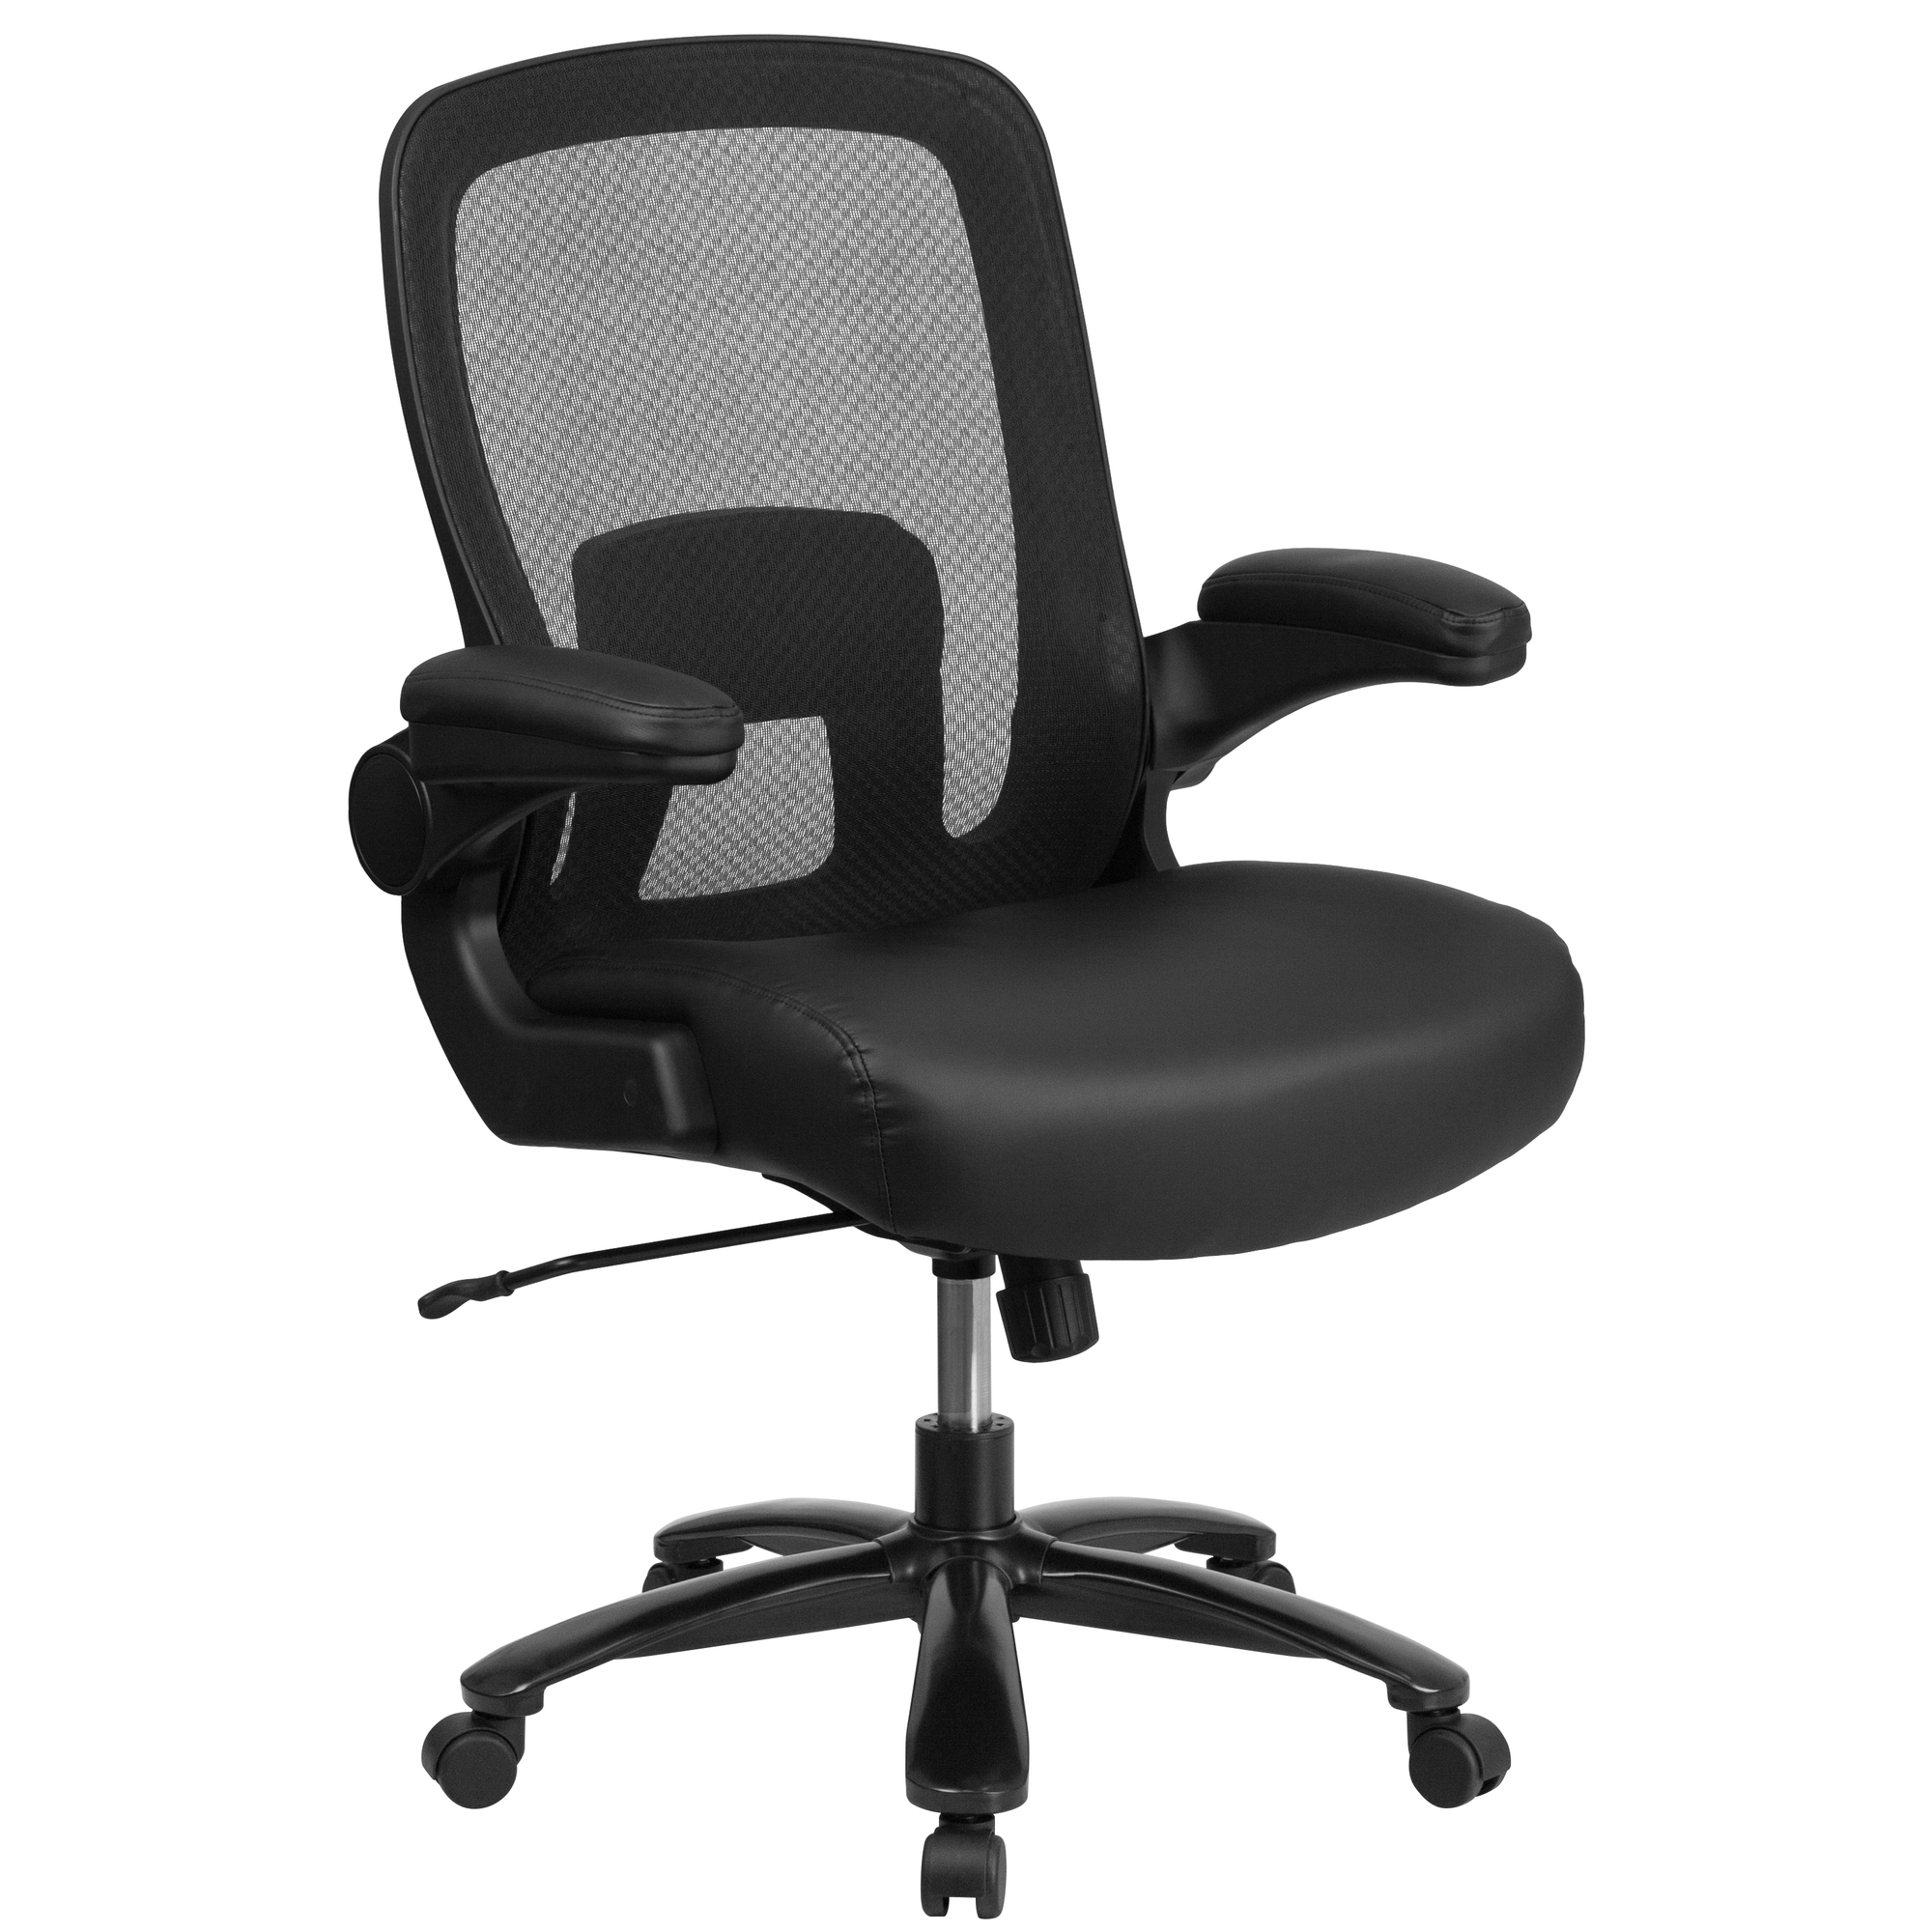 Big Tall 500 lb. Rated Black LeatherSoft Chair, Primary Color Black, Included (qty.) 1, Model - Flash Furniture BT20180LEA